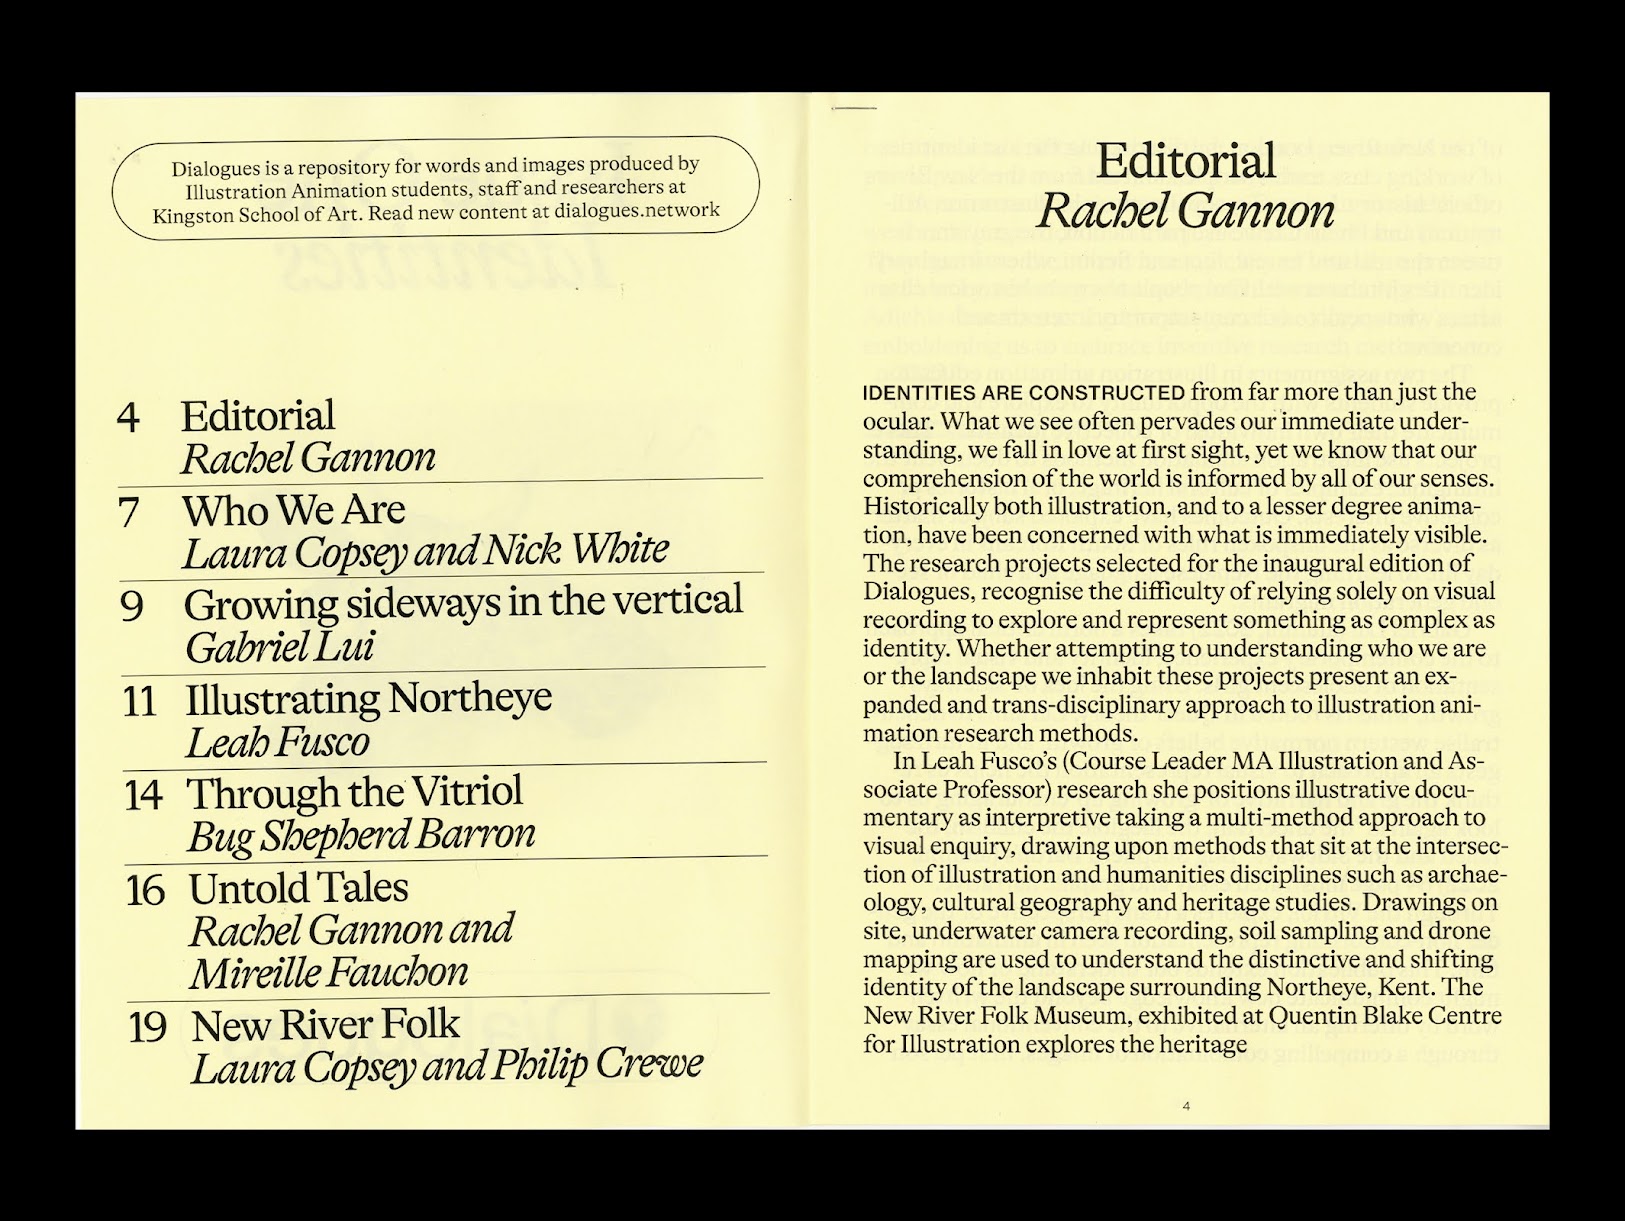 Scan shows inside pages of publication printed on light yellow paper. Left: Table of contents, Right: Editorial printed in large serif type.